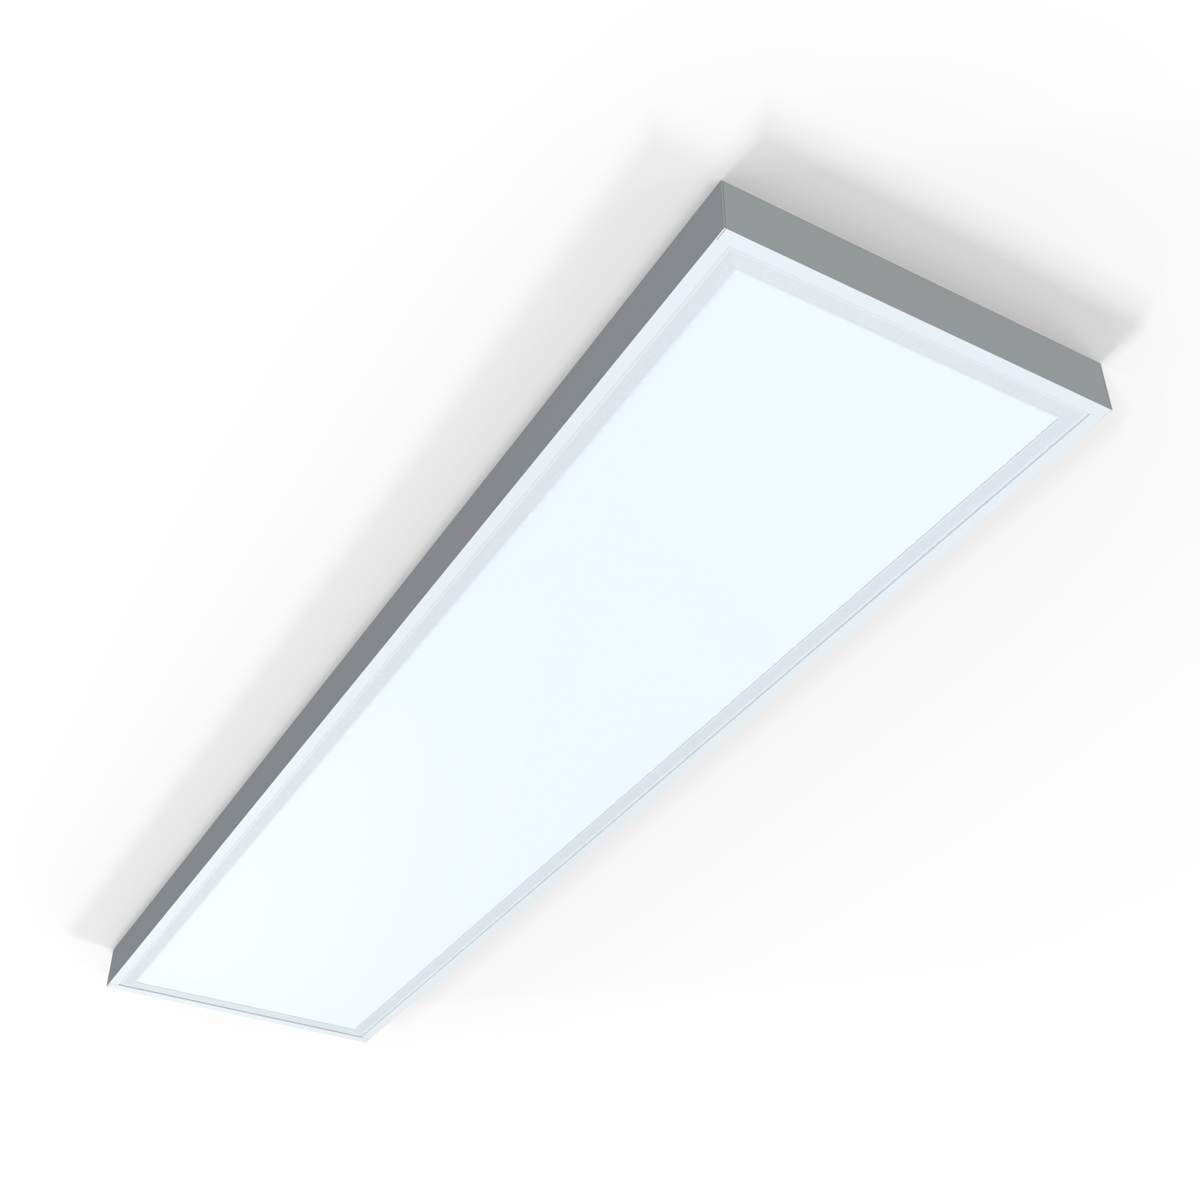 View 1200 x 300mm 40w Surface Mounted LED Panel Light 4000K information